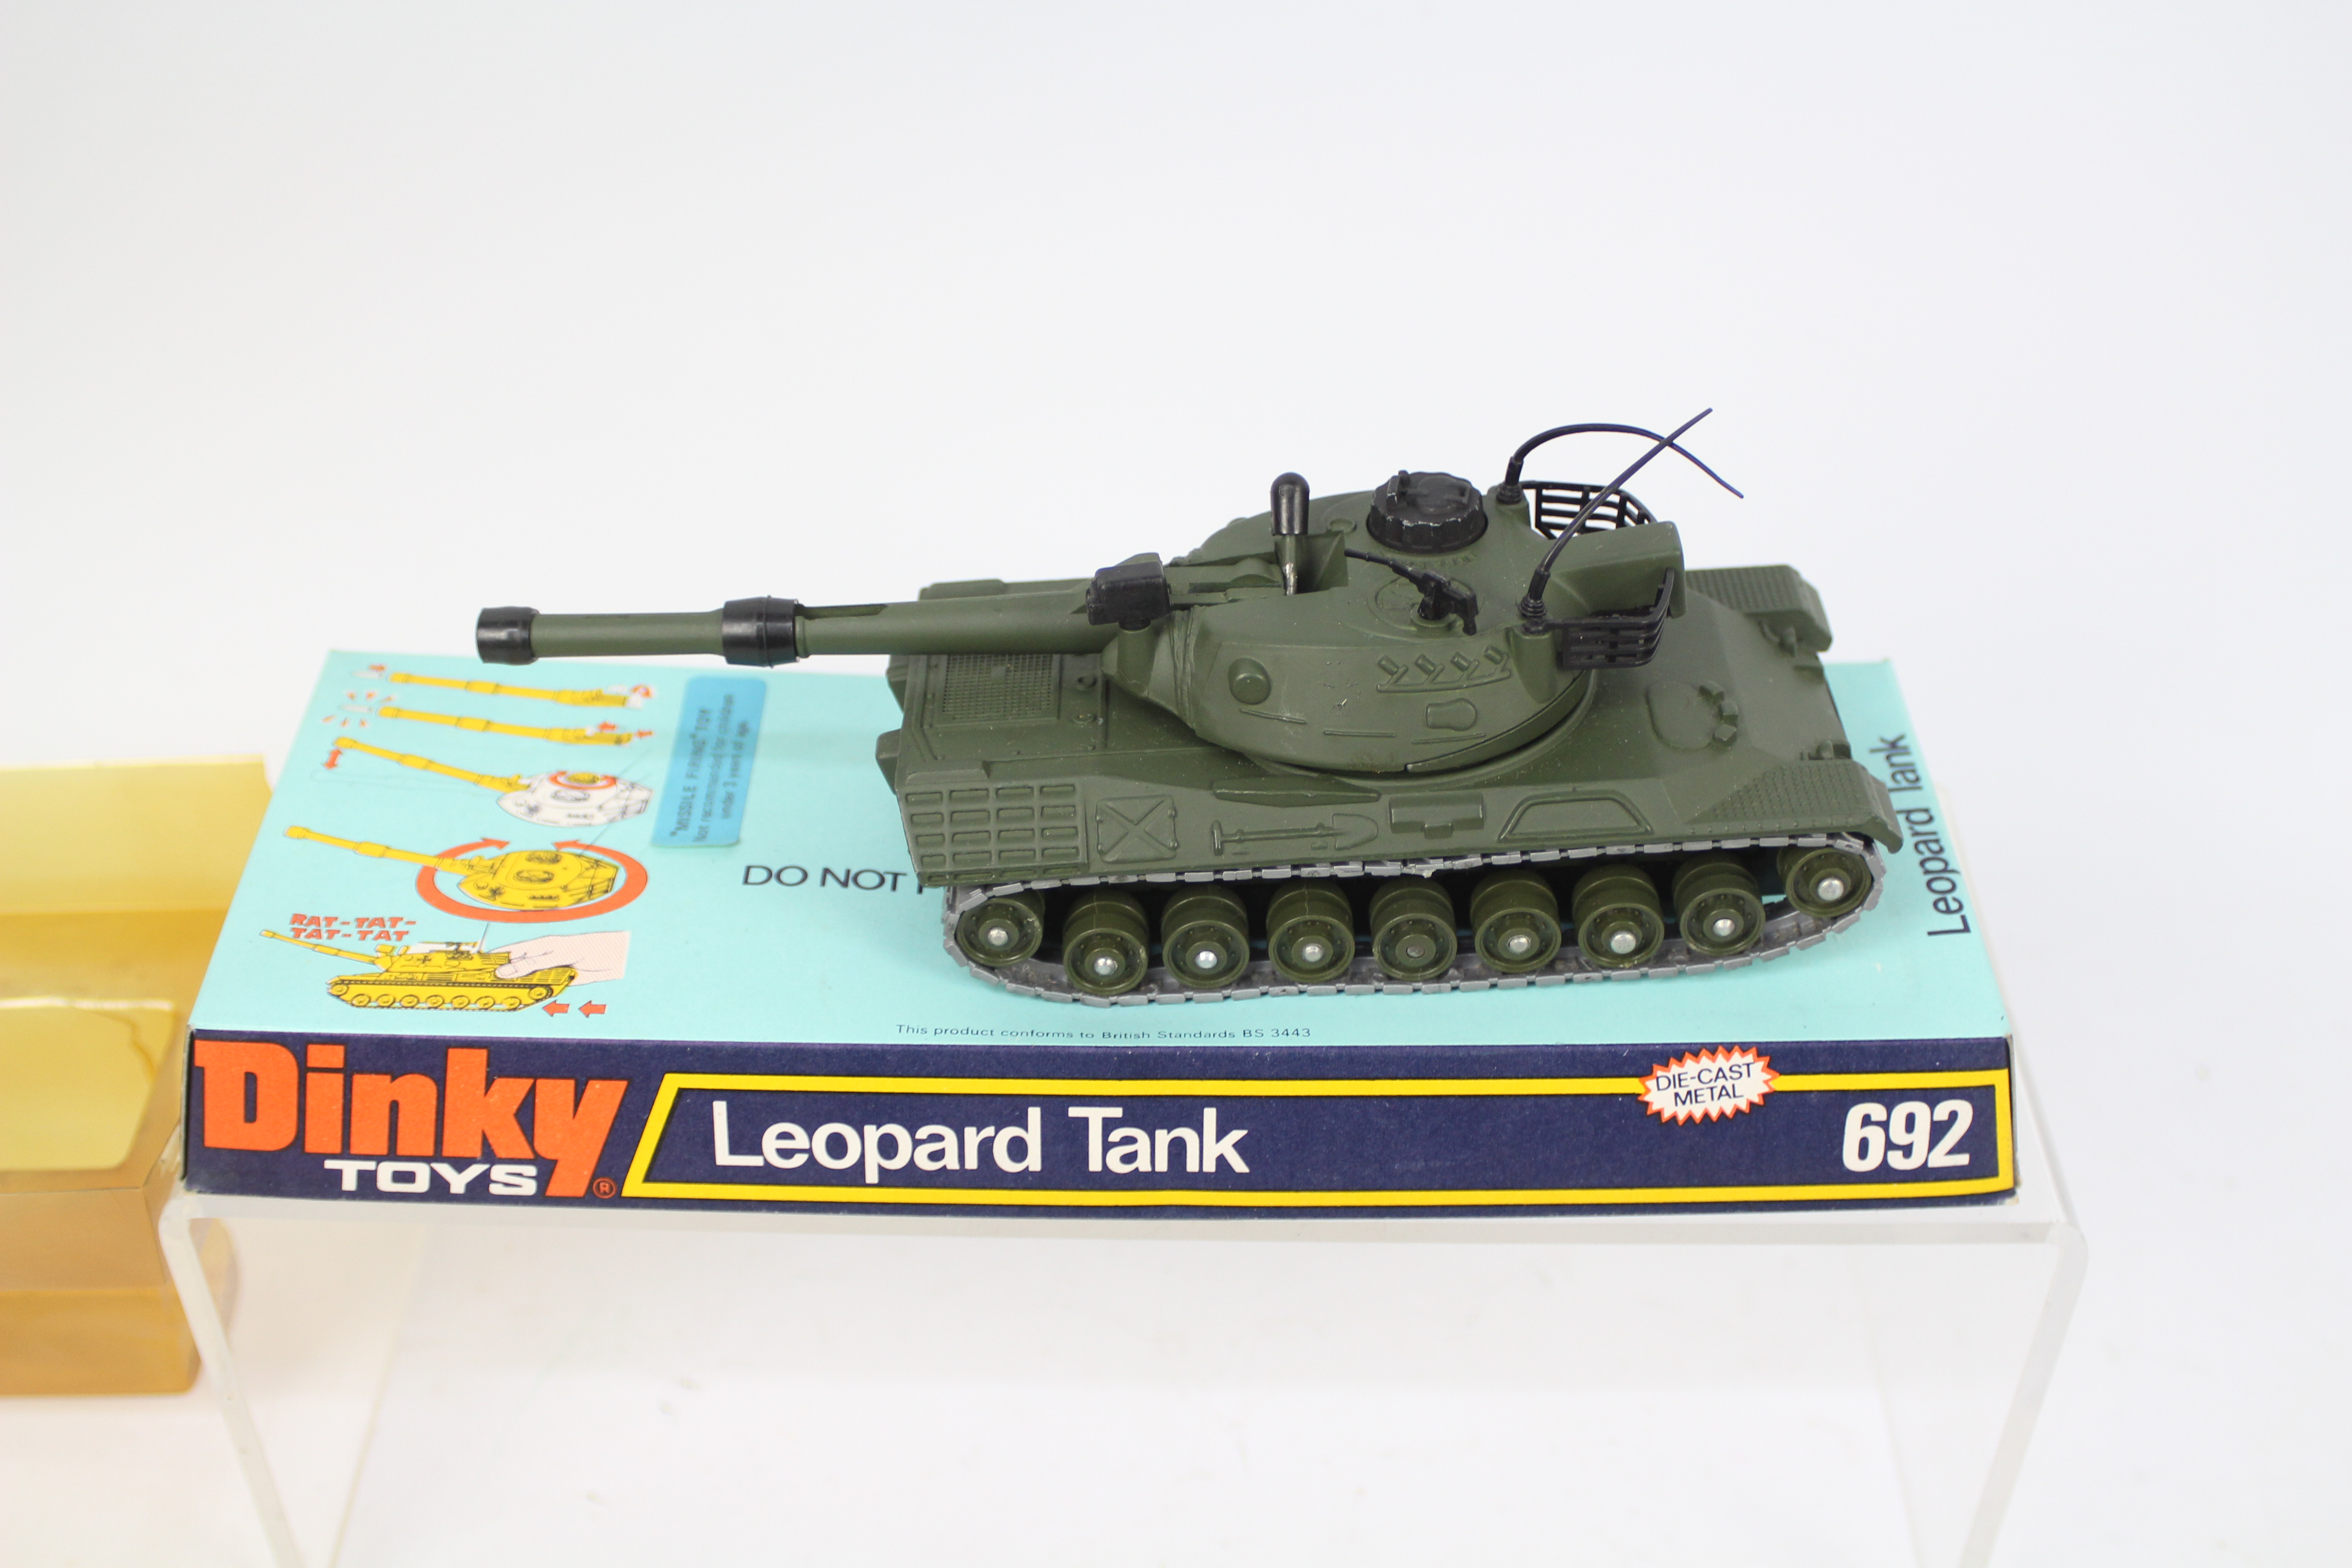 Dinky Toys - A Boxed Military Hovercraft #281appearing in Mint condition. - Image 5 of 5